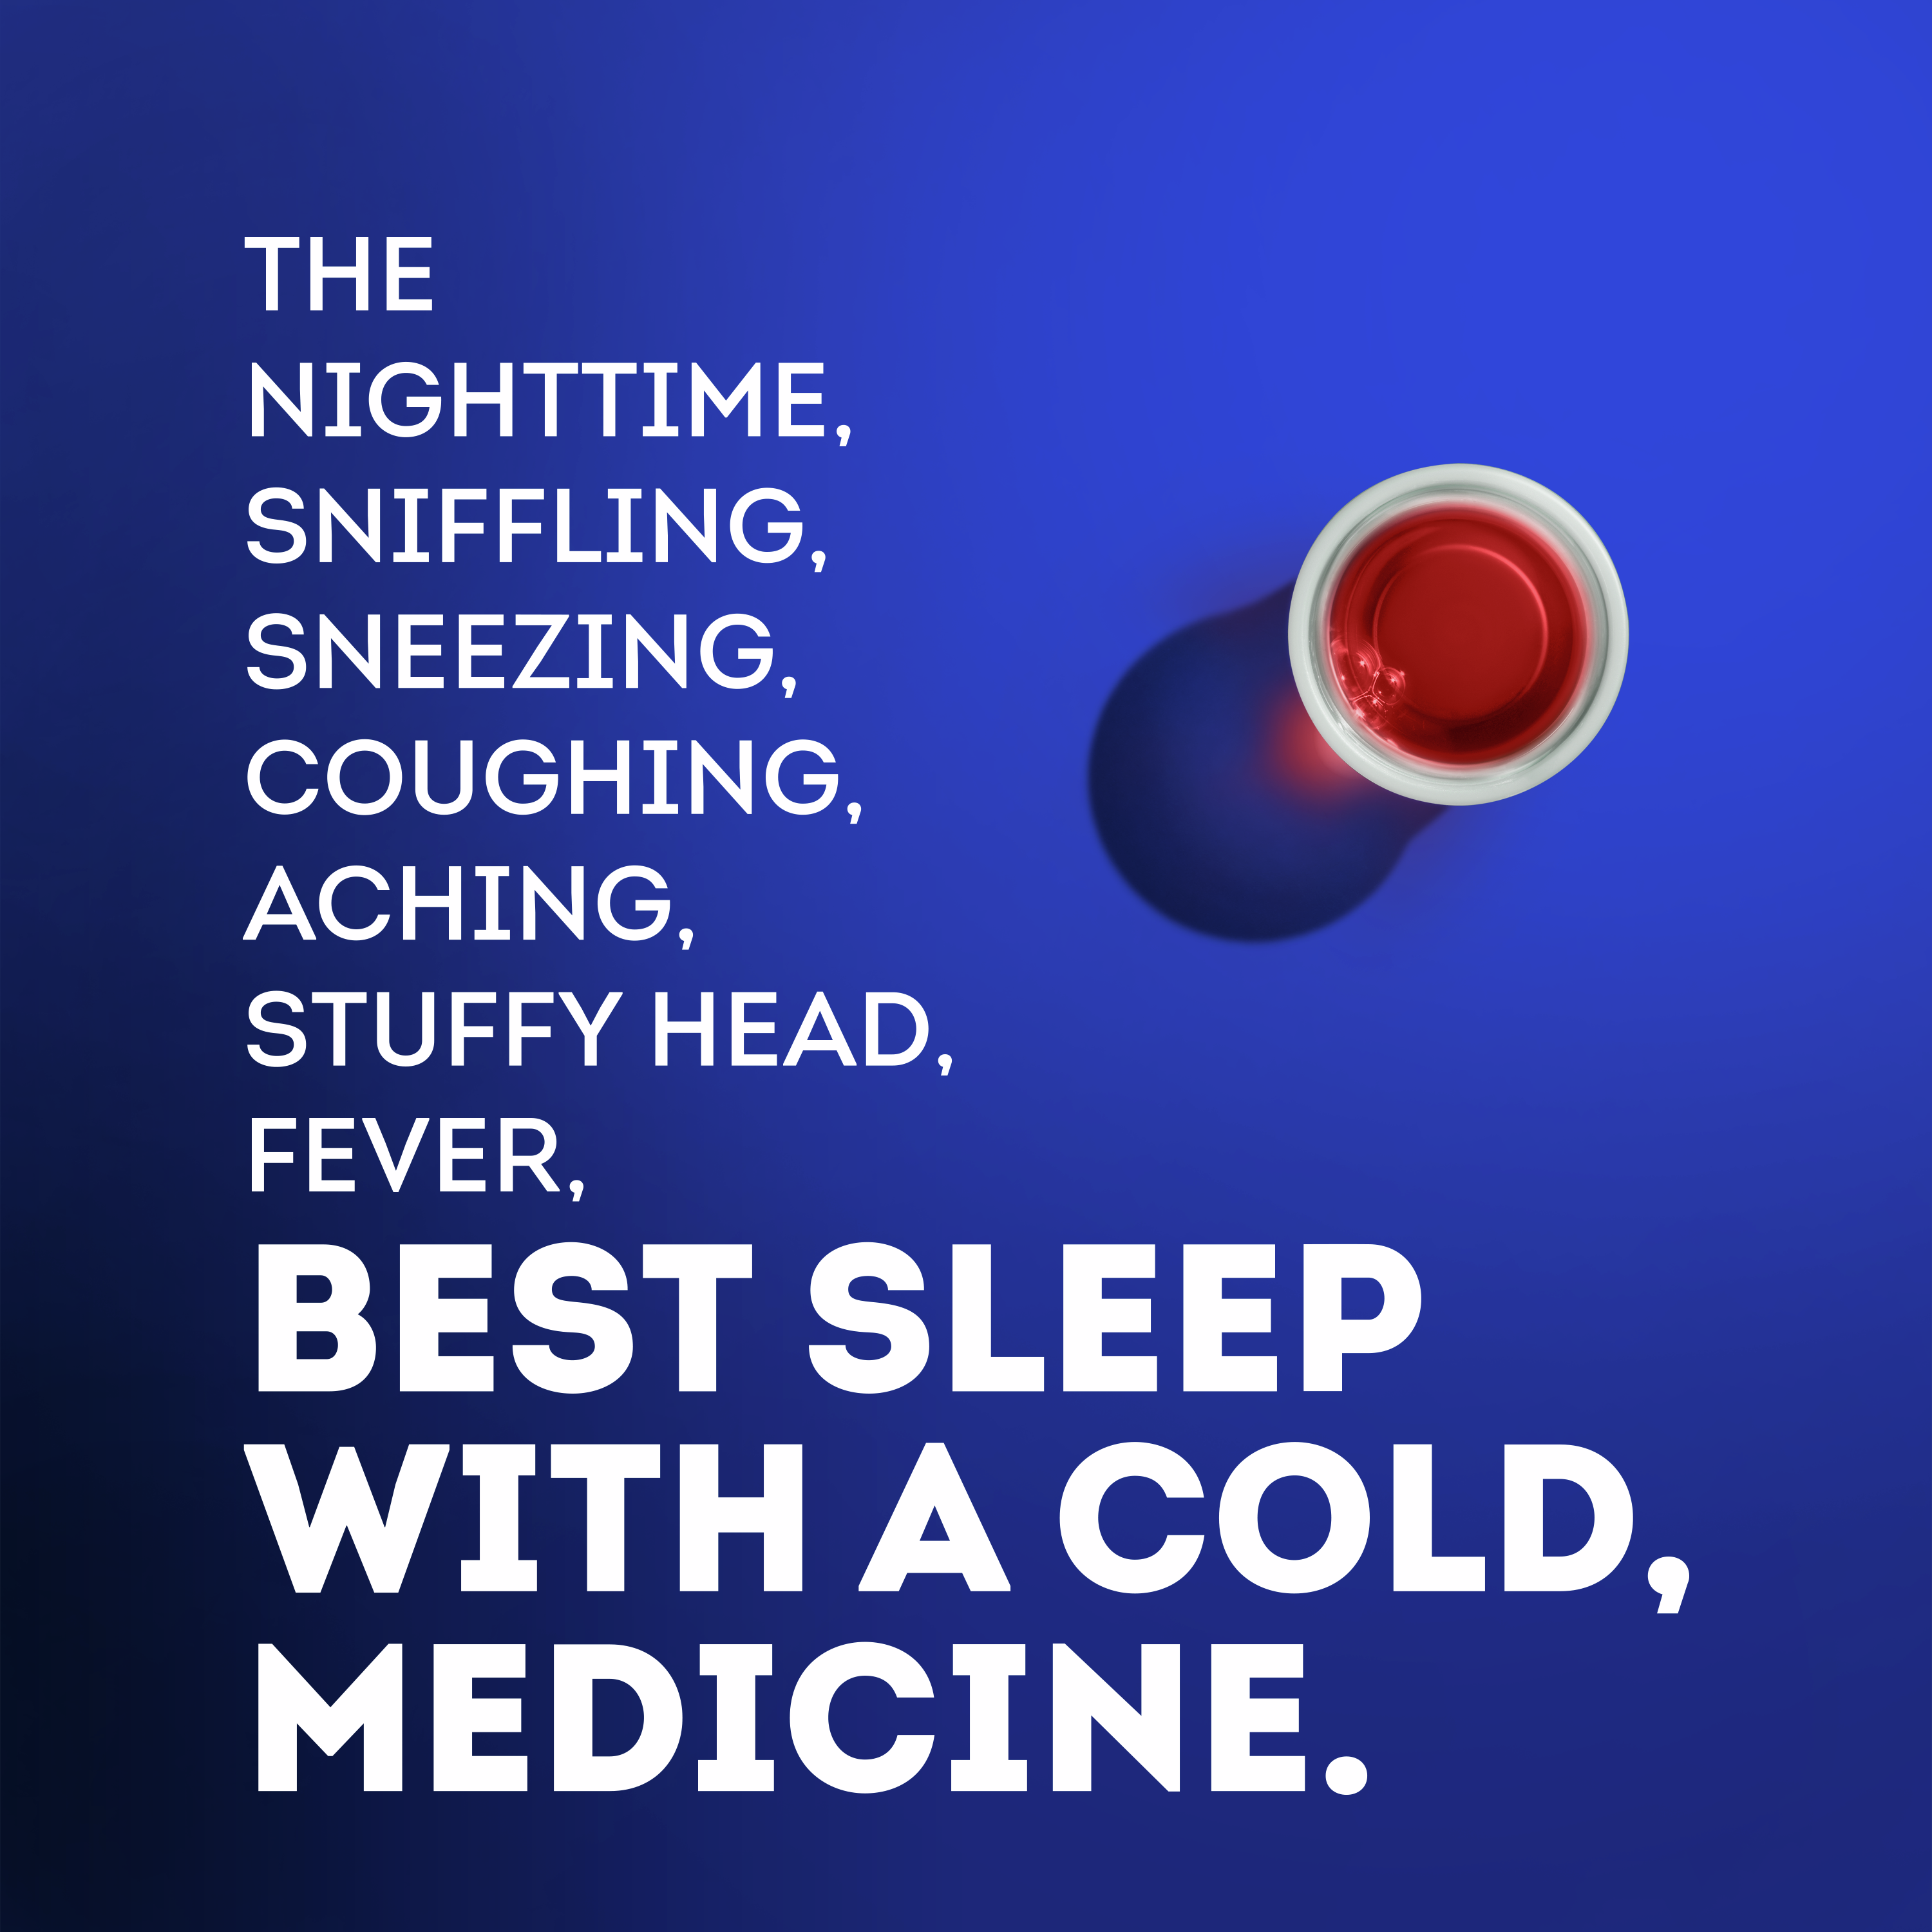 Best Sleep with a cold, medicine.